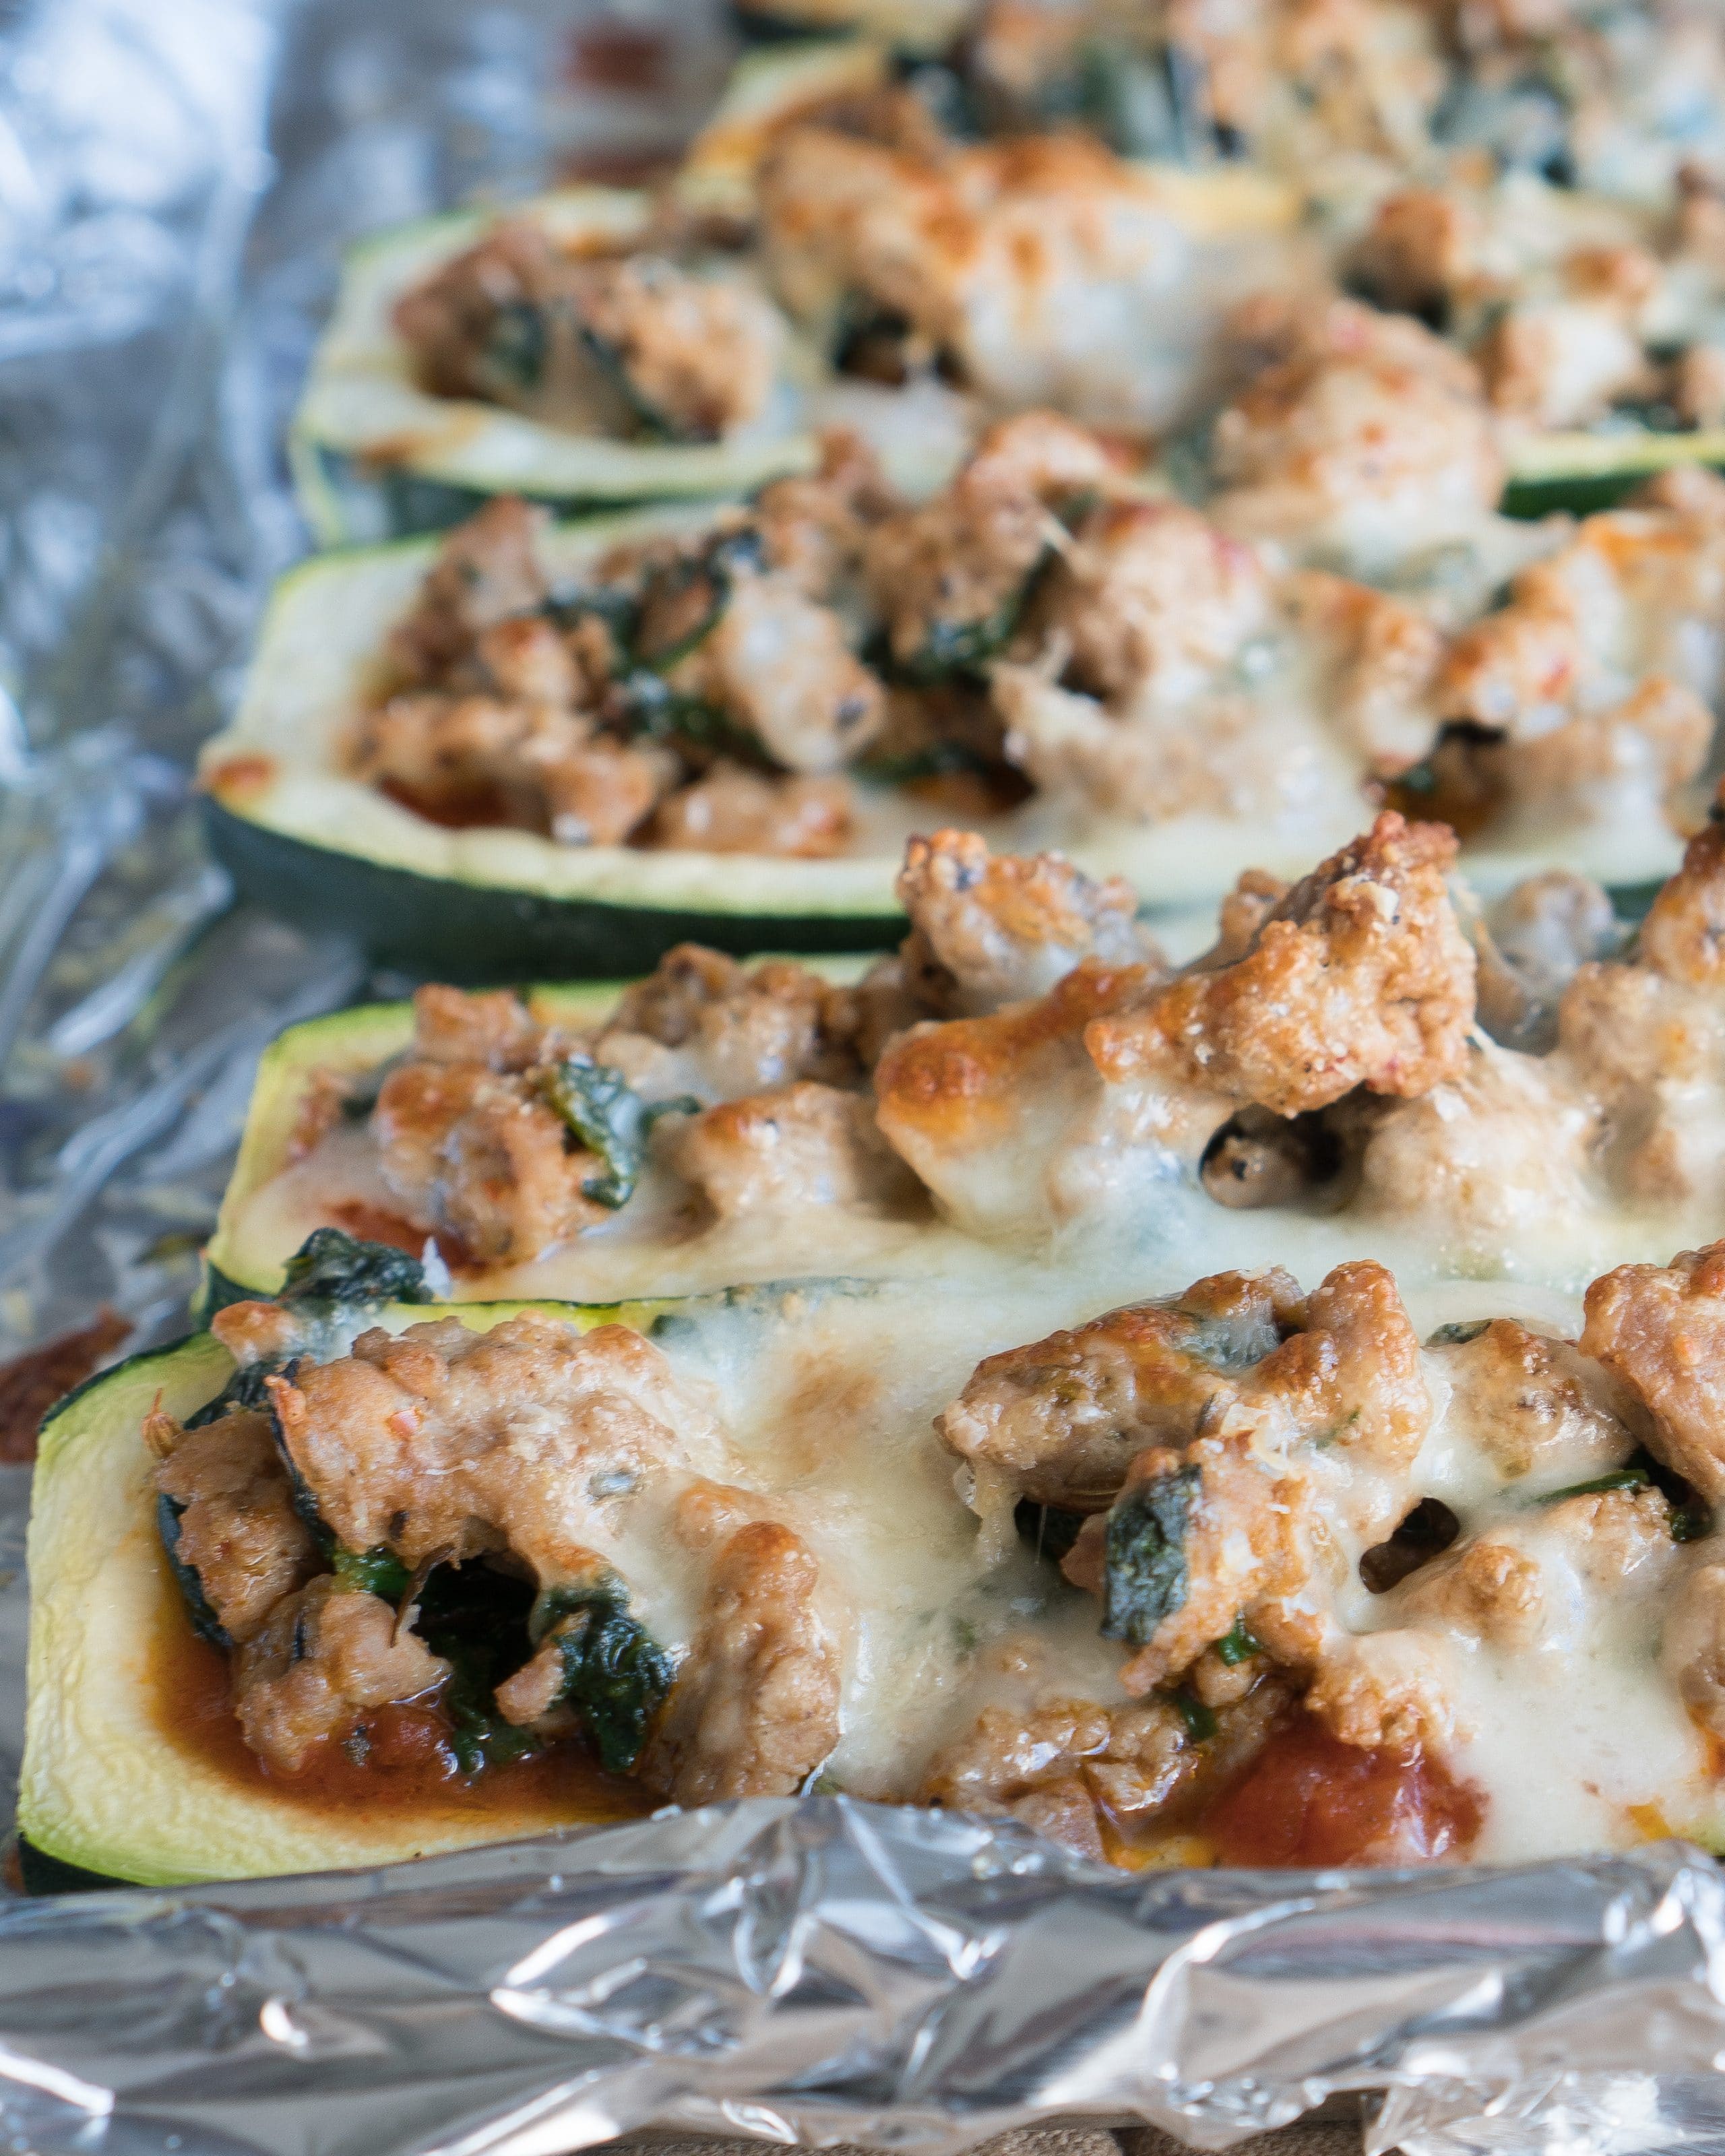 Lasagna Stuffed Zucchini Boats – Healthy, gluten-free recipe for Lasagna Stuffed Zucchini Boats! Using zucchini, tomato-basil sauce, chopped spinach, mozzarella cheese, parmesan, and ground turkey flavored to taste like crumbled Italian sausage. Low carb, low fat, & protein-packed ♥ | freeyourfork.com